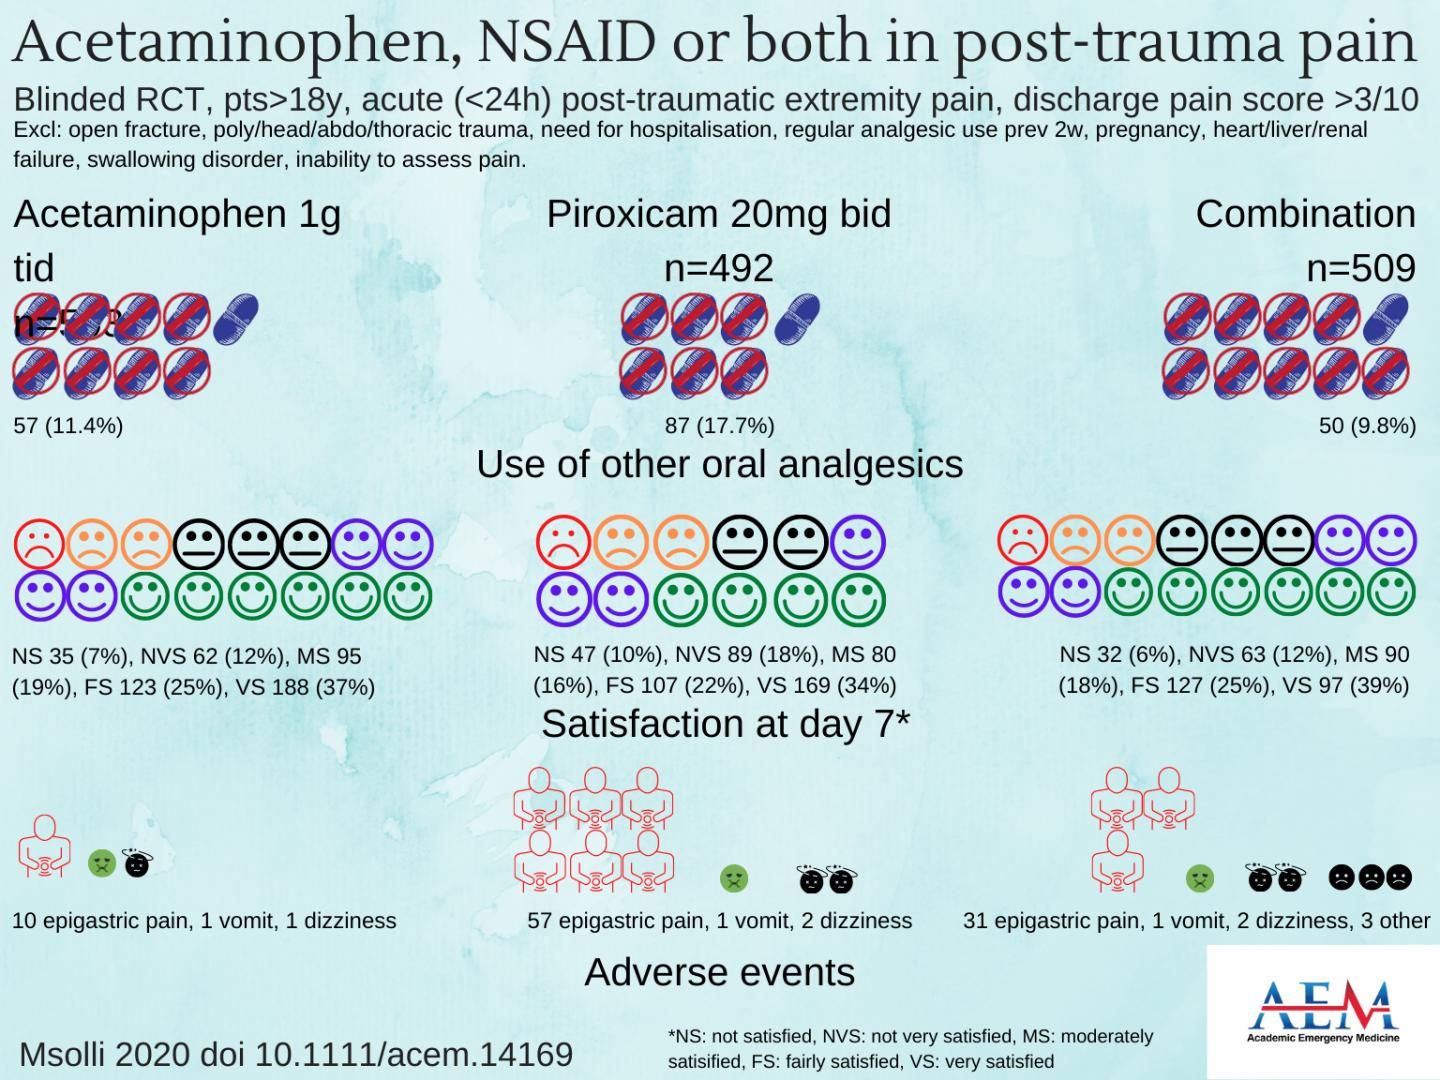 ACETAMINOPHEN, NSAID OR BOTH IN POST-TRAUMA PAIN